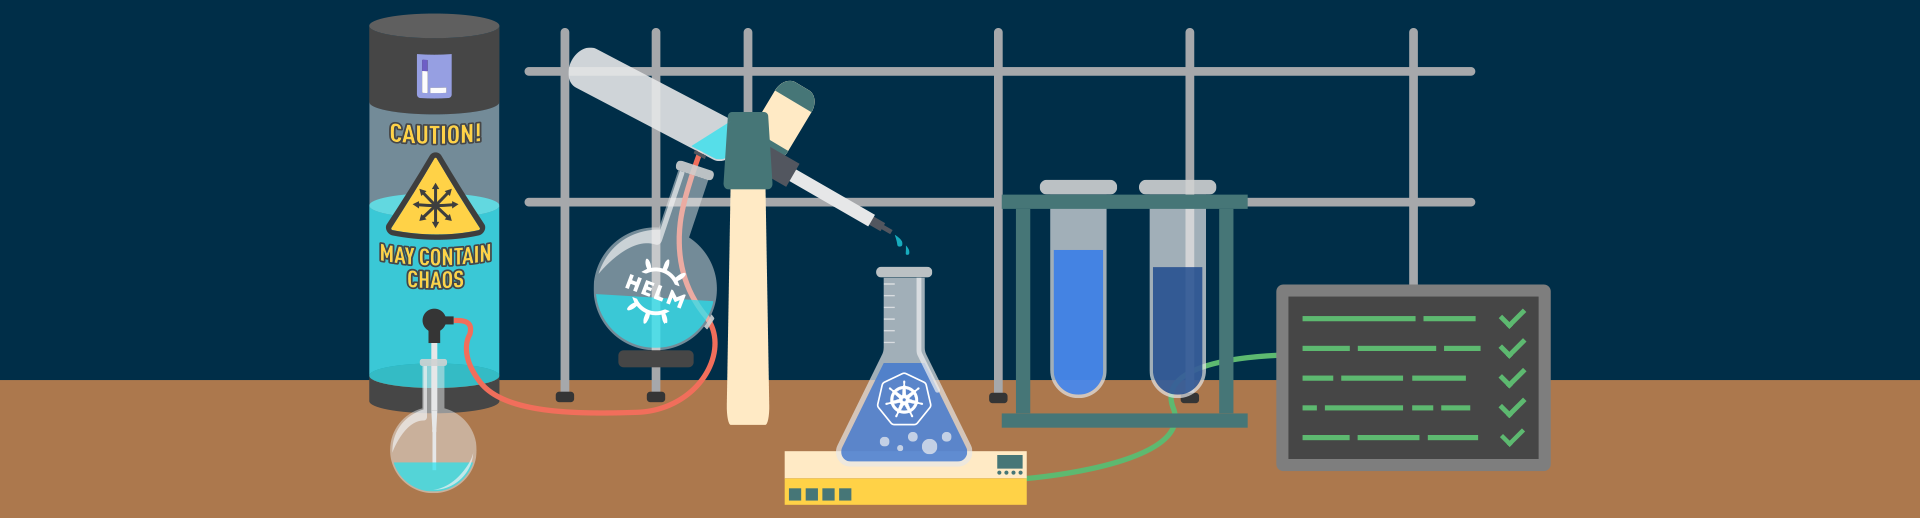 A chemistry set with the Kubernetes and Helm logos and a warning 'May contain chaos'